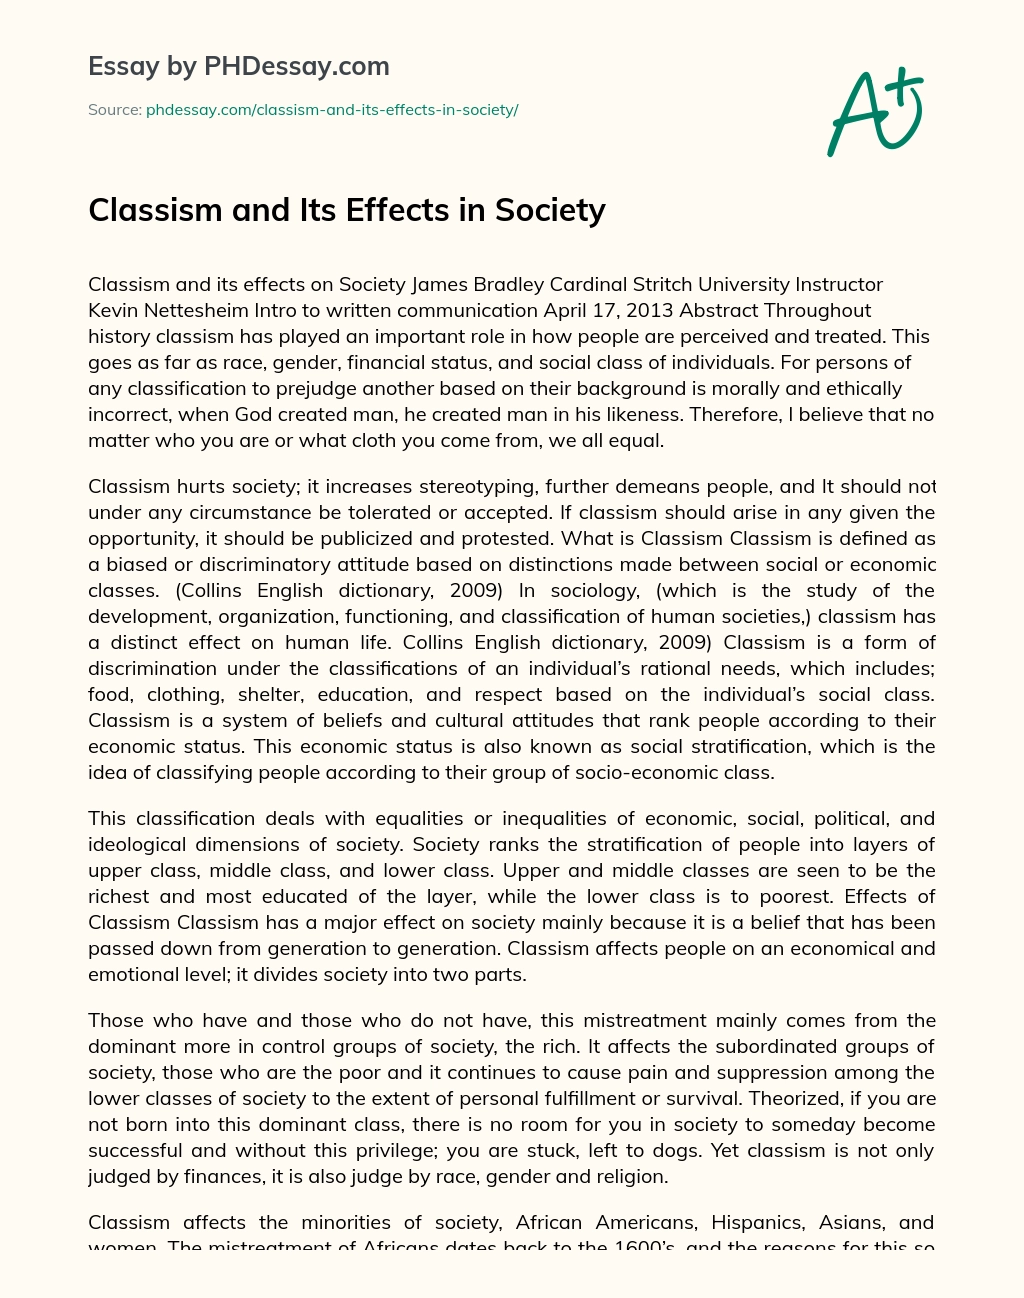 Classism and Its Effects in Society essay